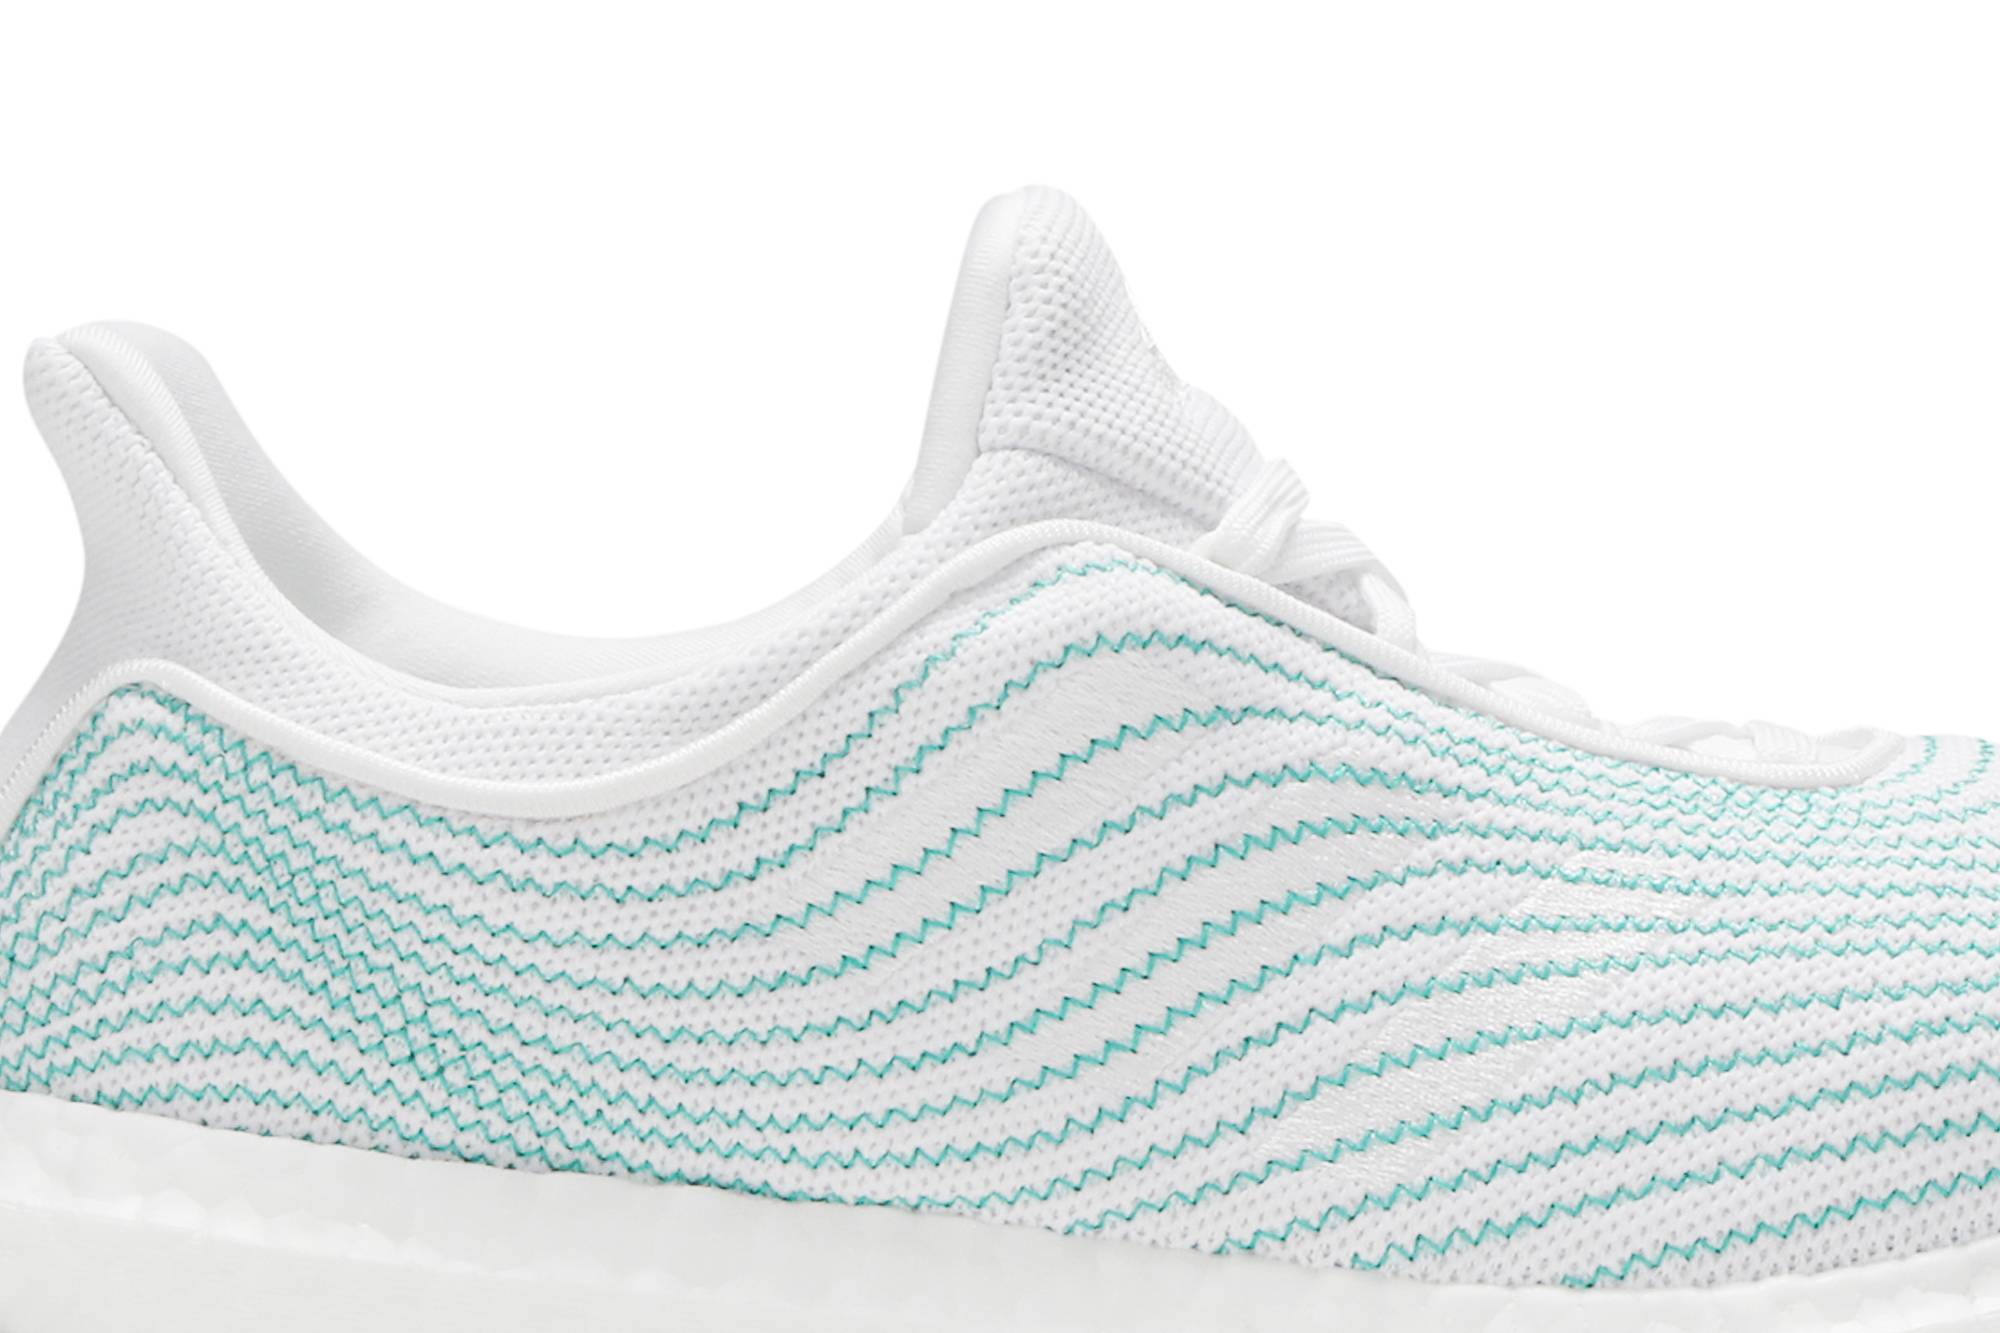 Adidas Parley x UltraBoost DNA - Cloud White ()